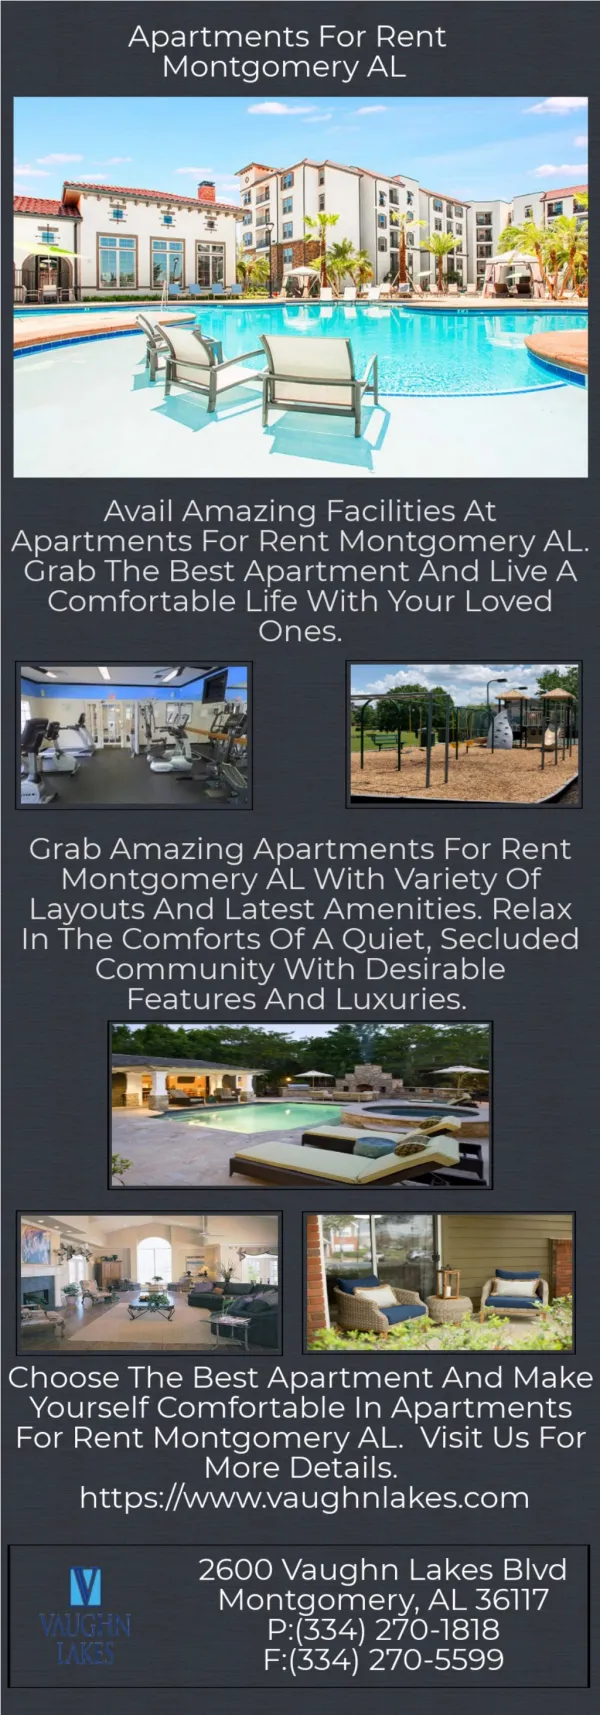 Apartments For Rent Montgomery AL Are Available